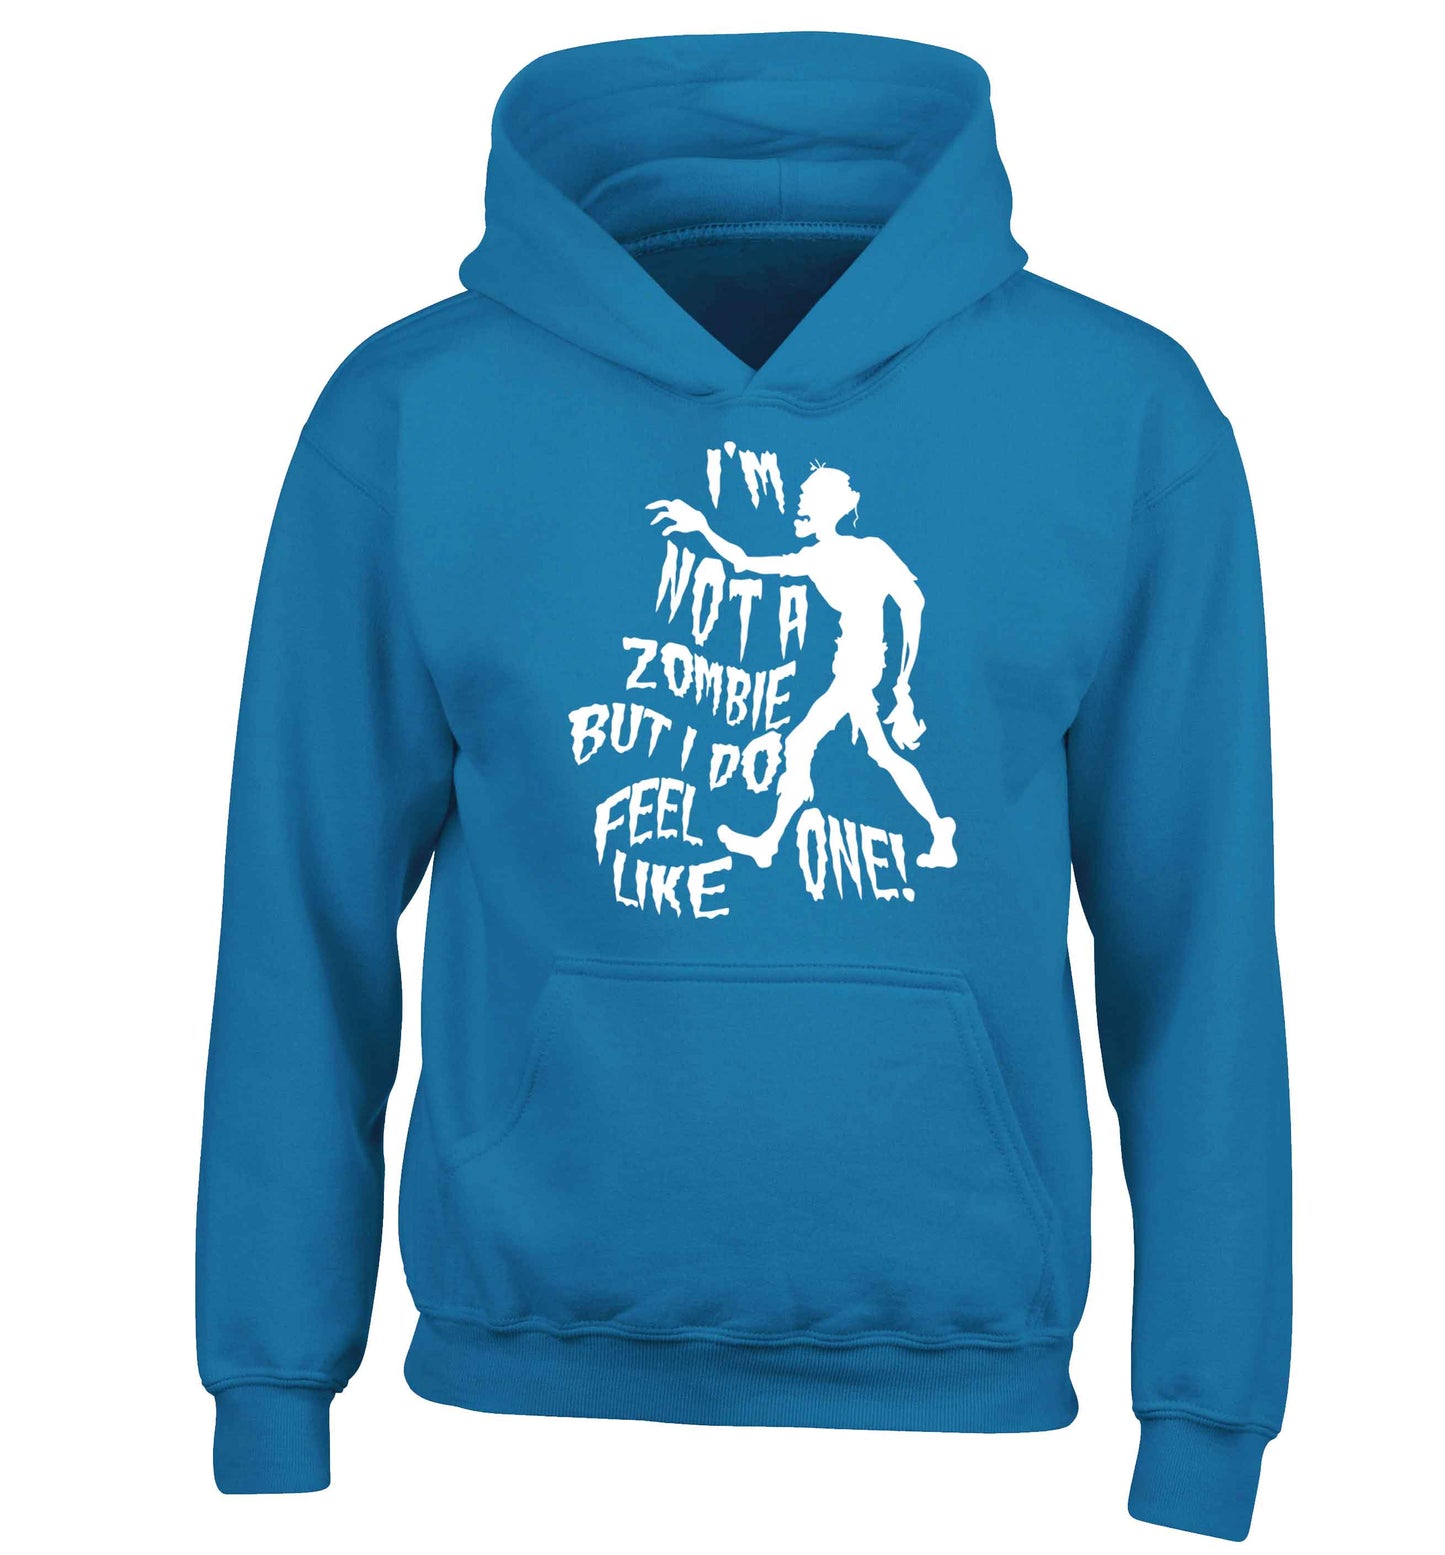 I'm not a zombie but I do feel like one! children's blue hoodie 12-13 Years